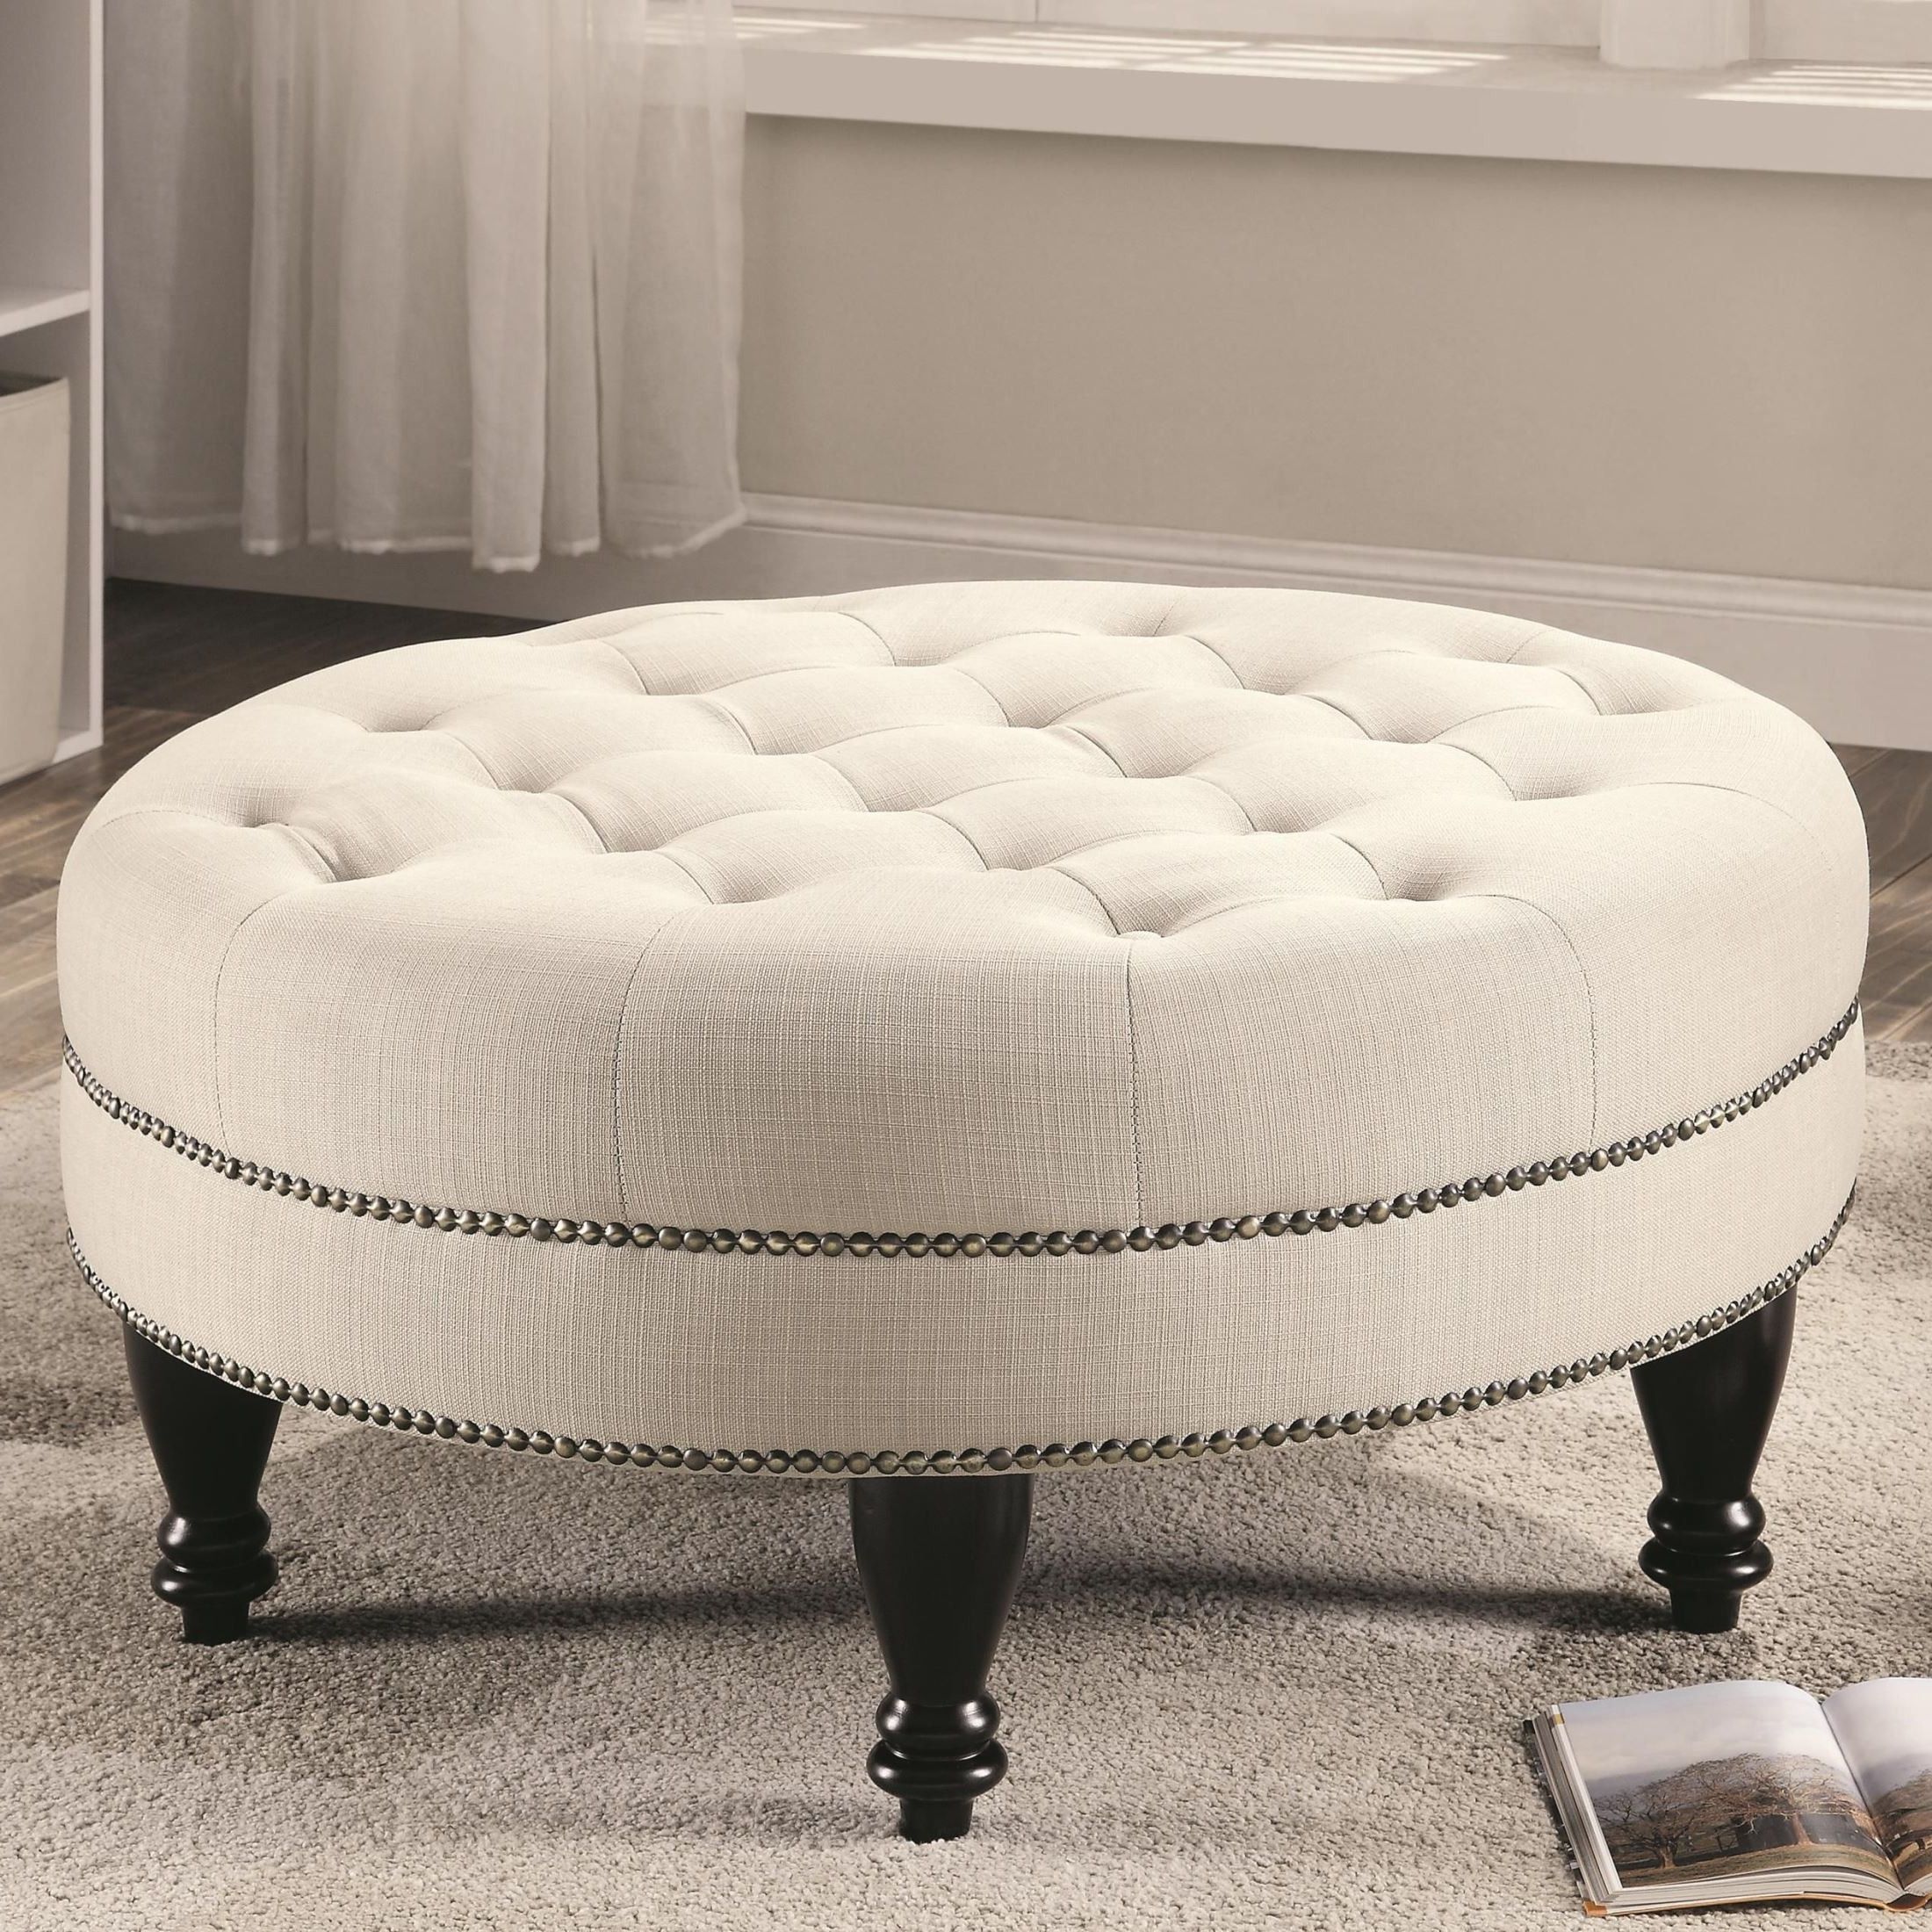 500018 Oatmeal Large Round Ottoman From Coaster (500018) (View 4 of 10)